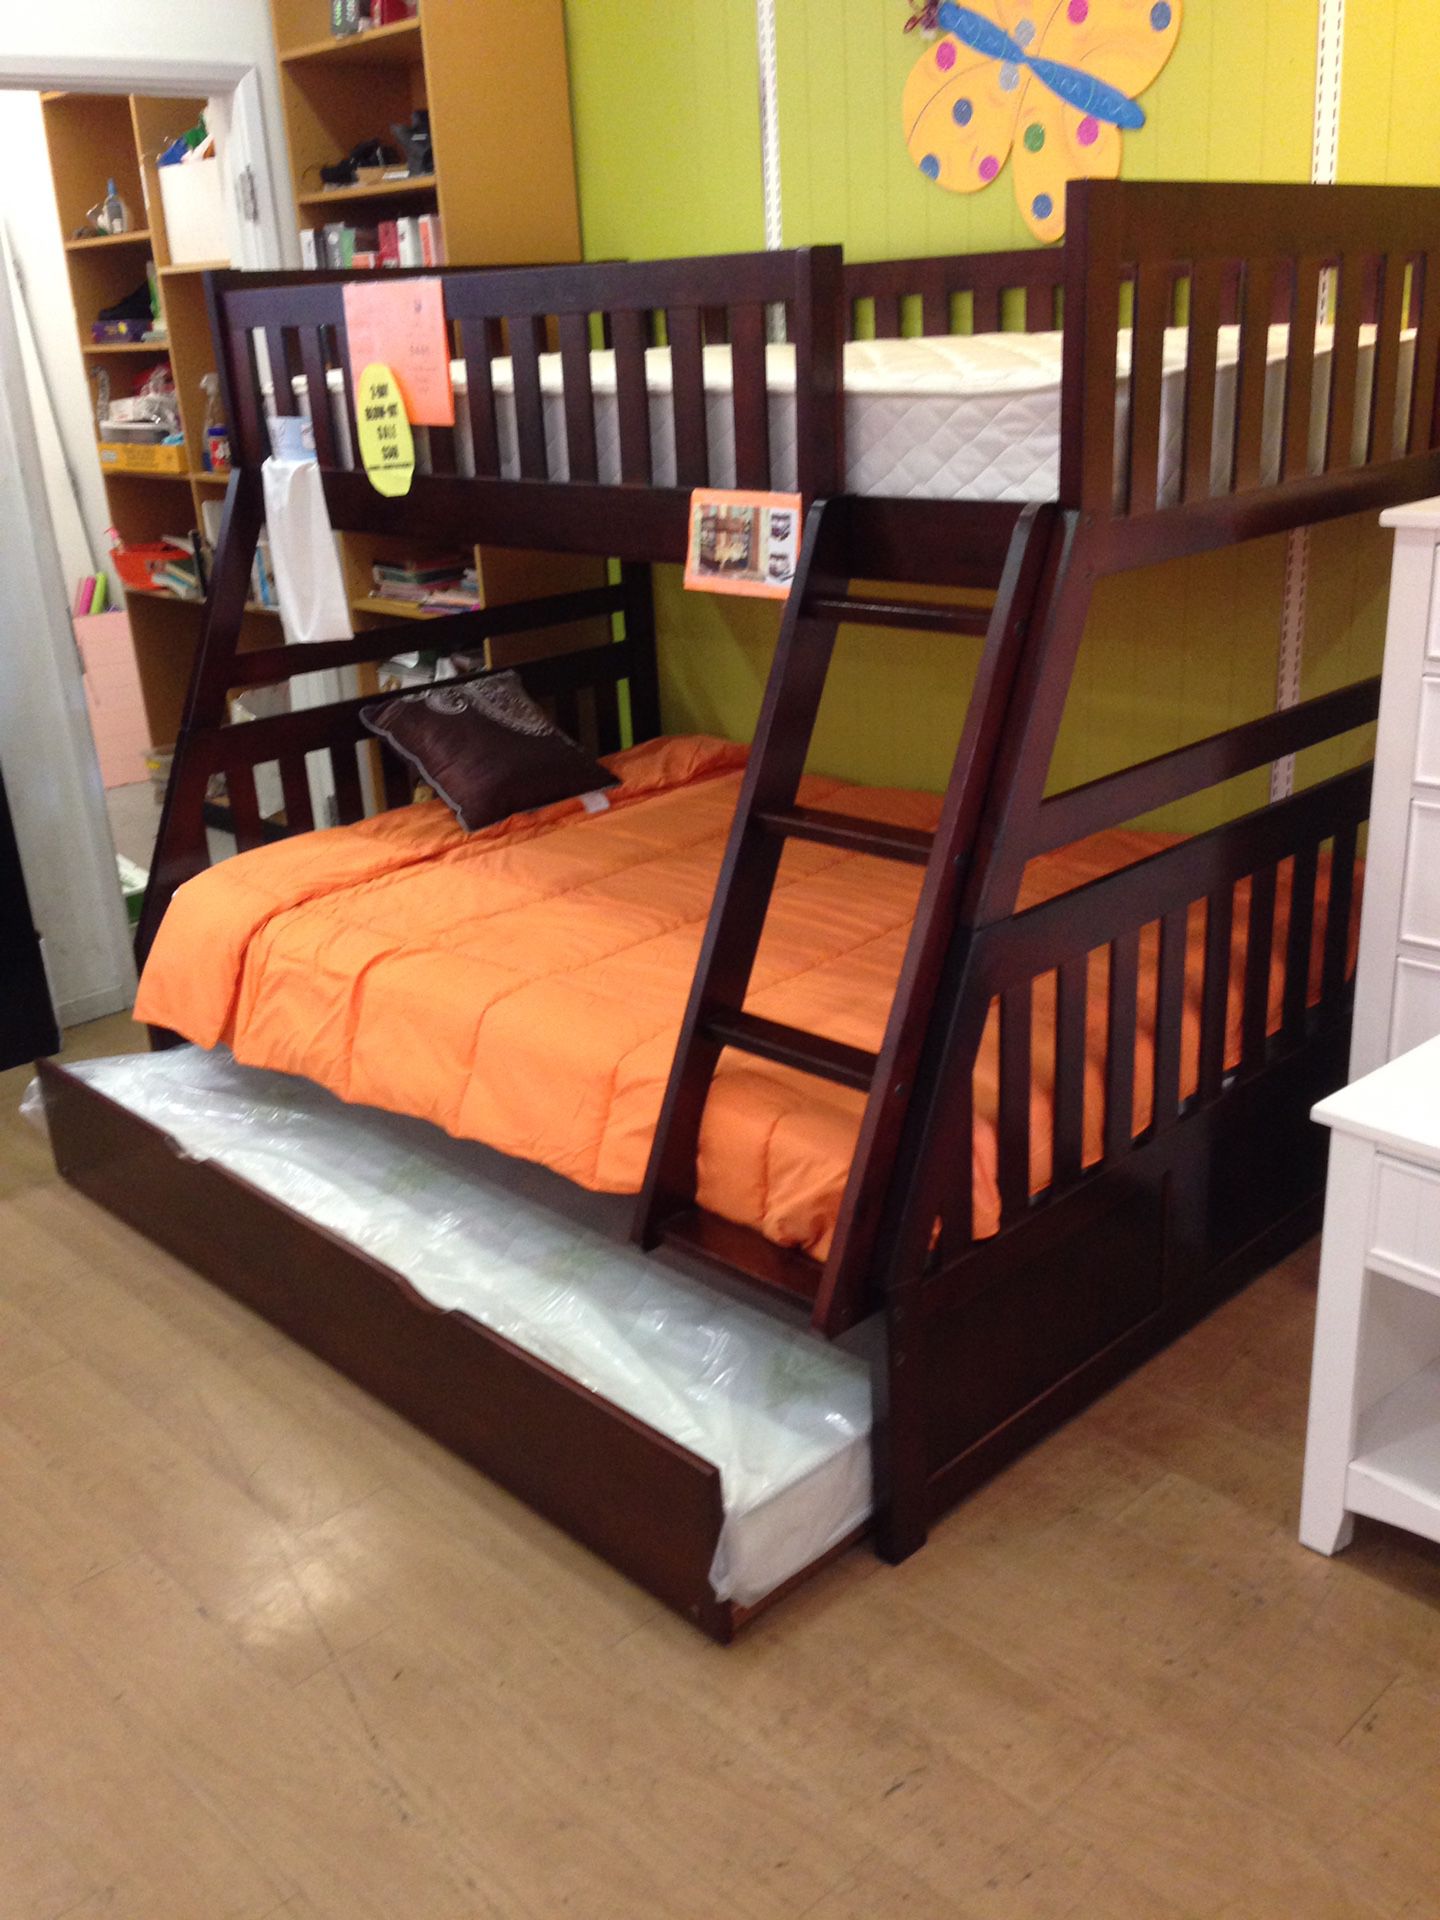 Twin overfull bunk bed with trundle